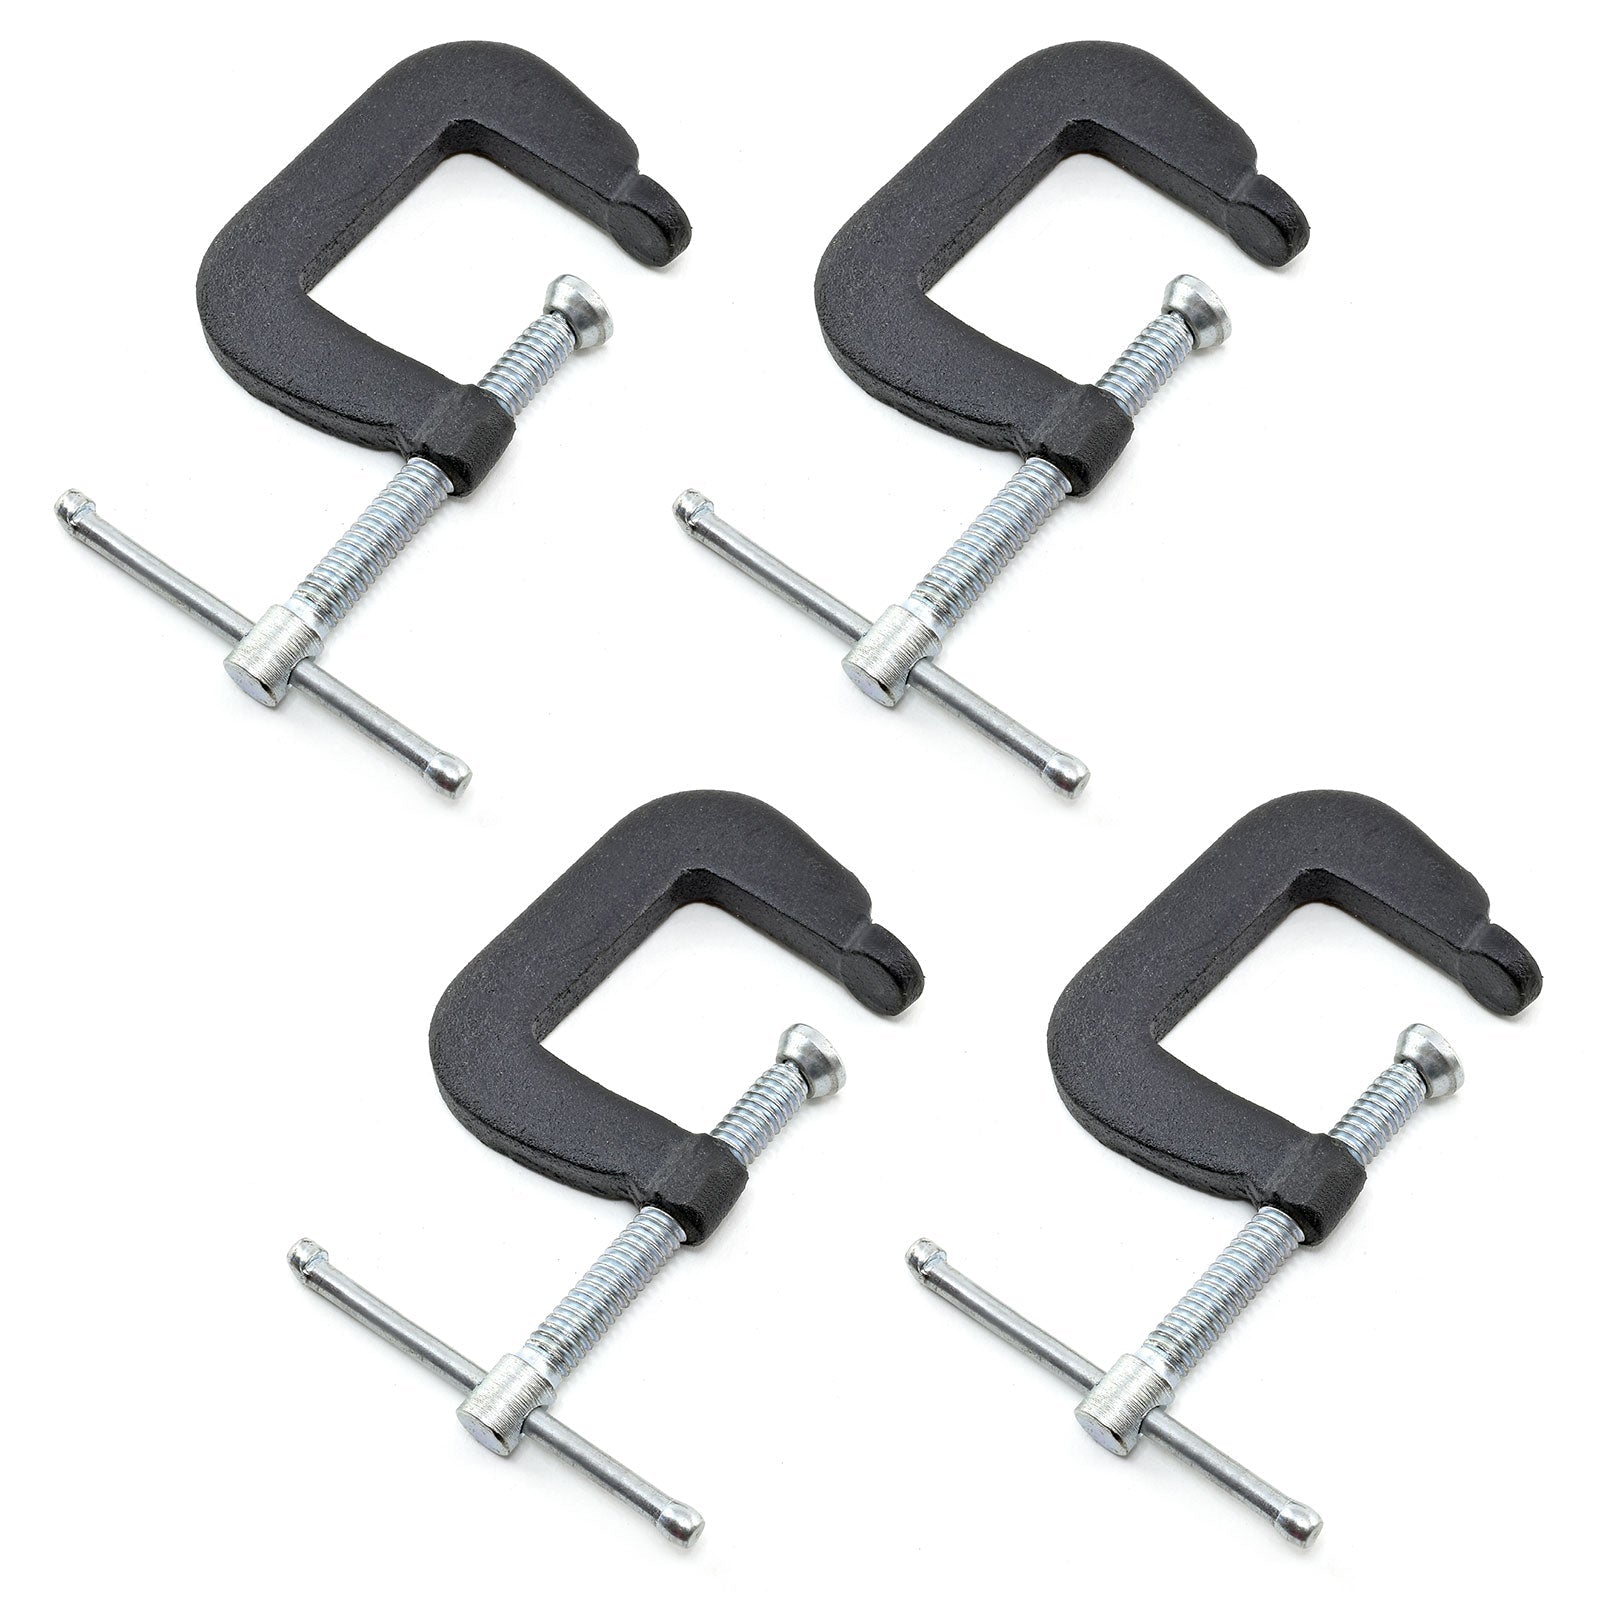 1" x 1" Miniature Forged Steel C - clamp, Set of 4